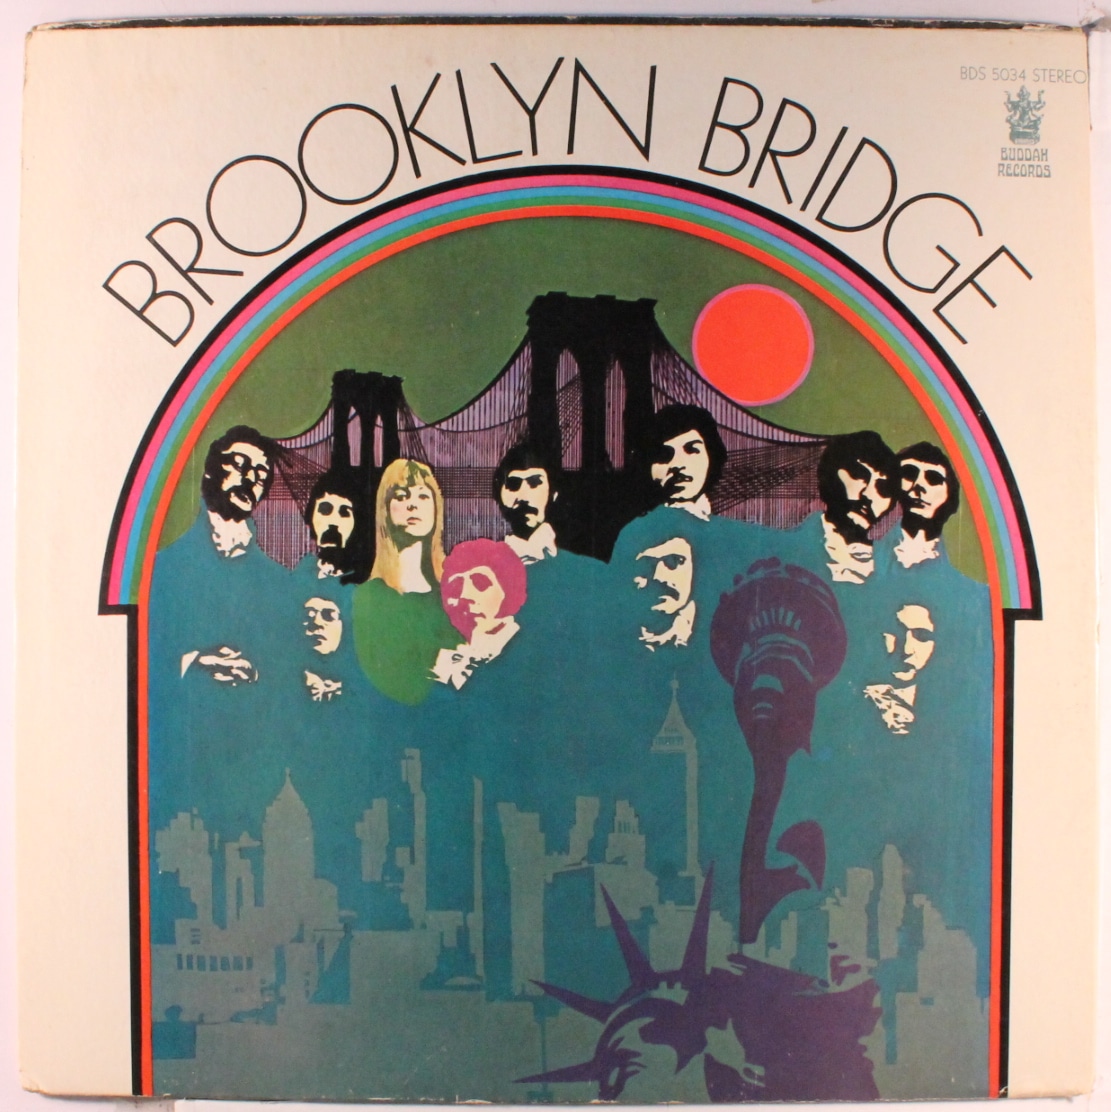 Brooklyn Bridge, "The Worst That Could Happen" « American Songwriter